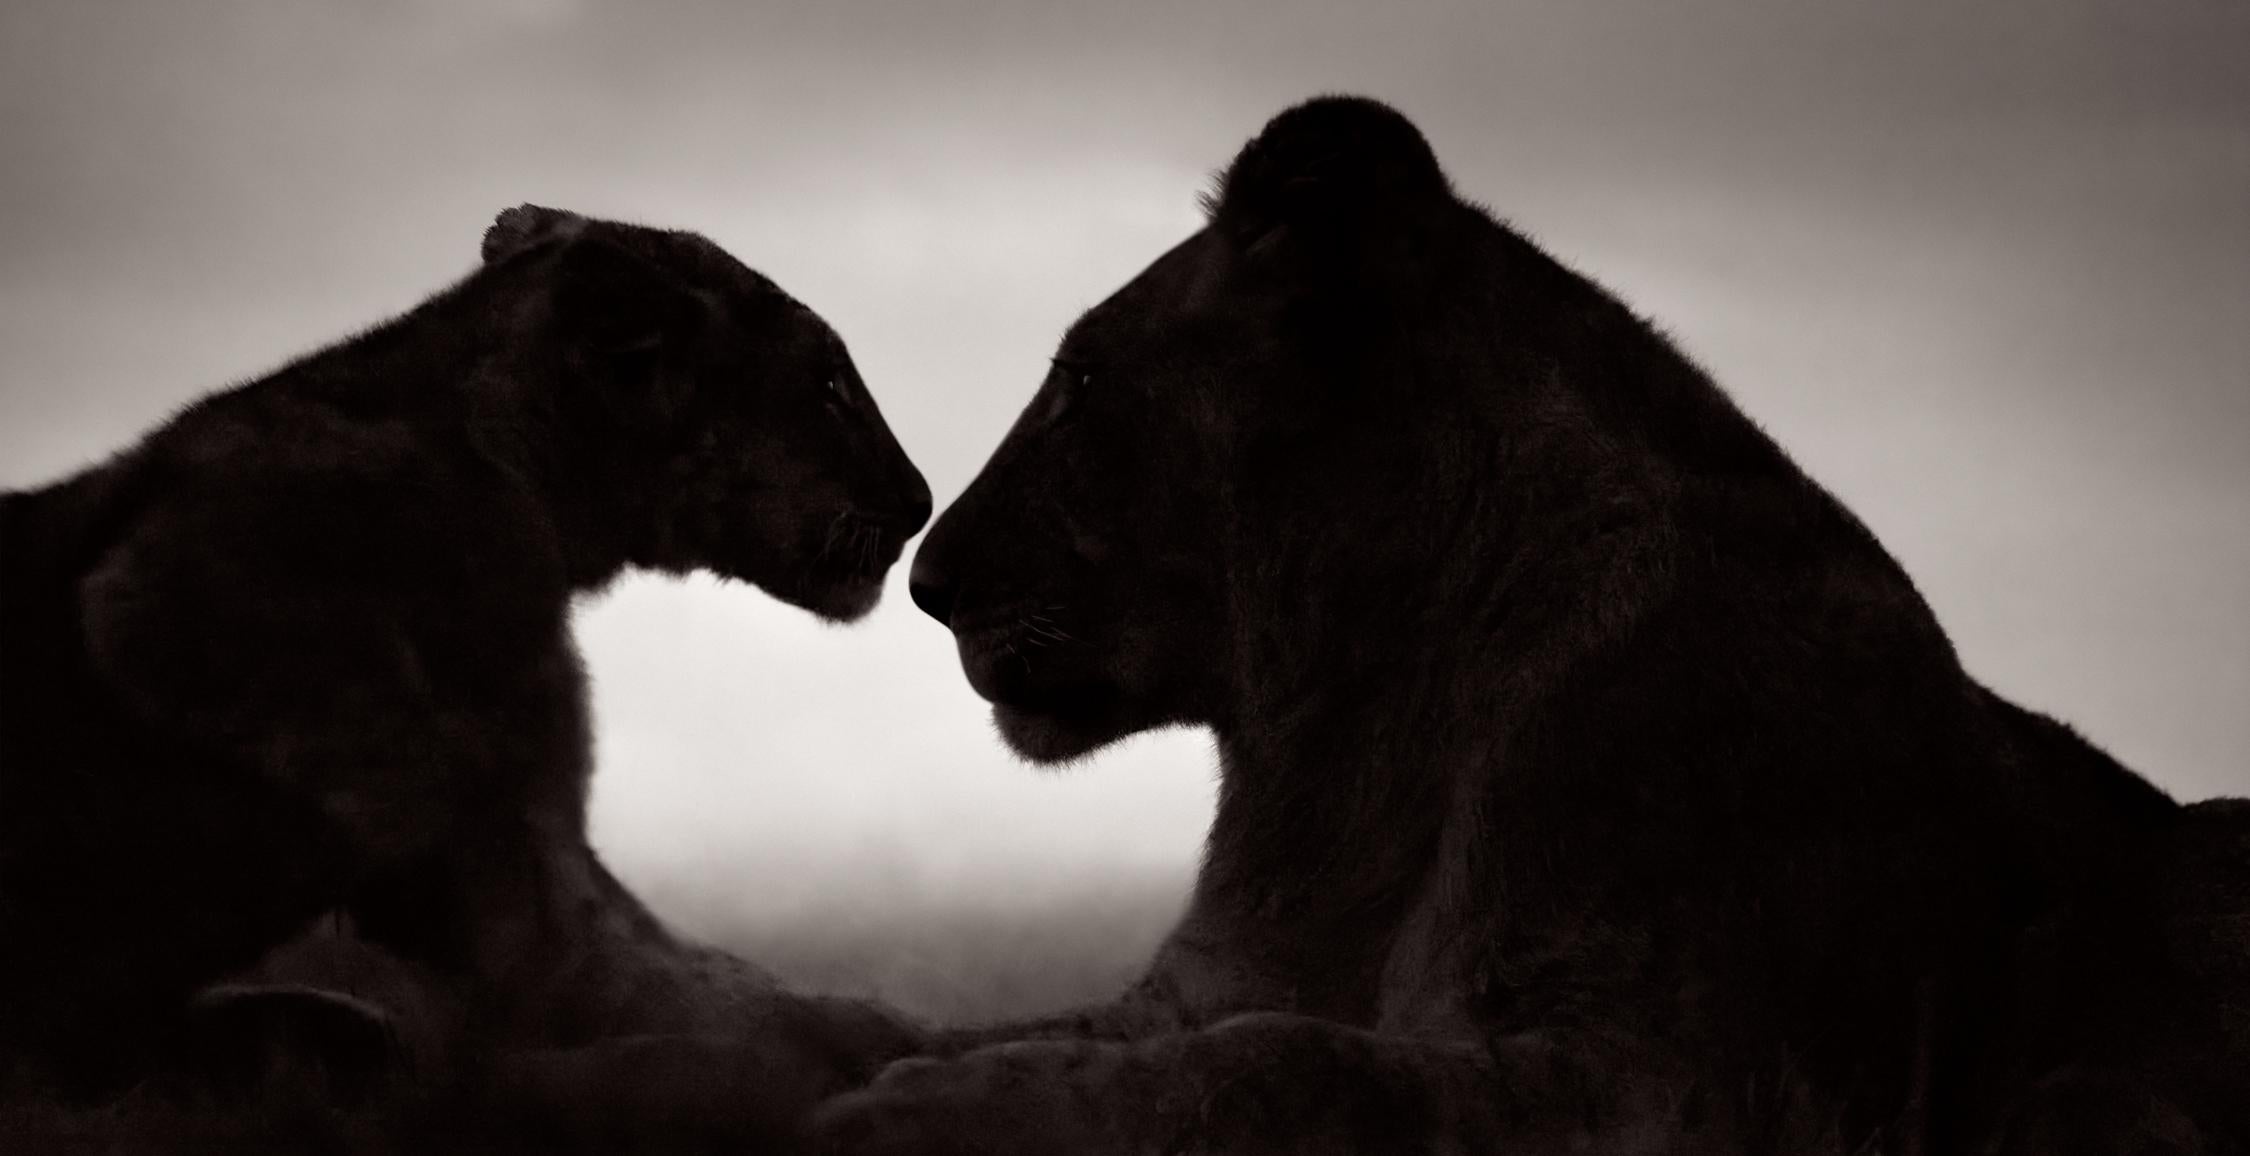 Drew Doggett Black and White Photograph - Silhouette of Two Lions Facing One Another at Dusk, Black & White